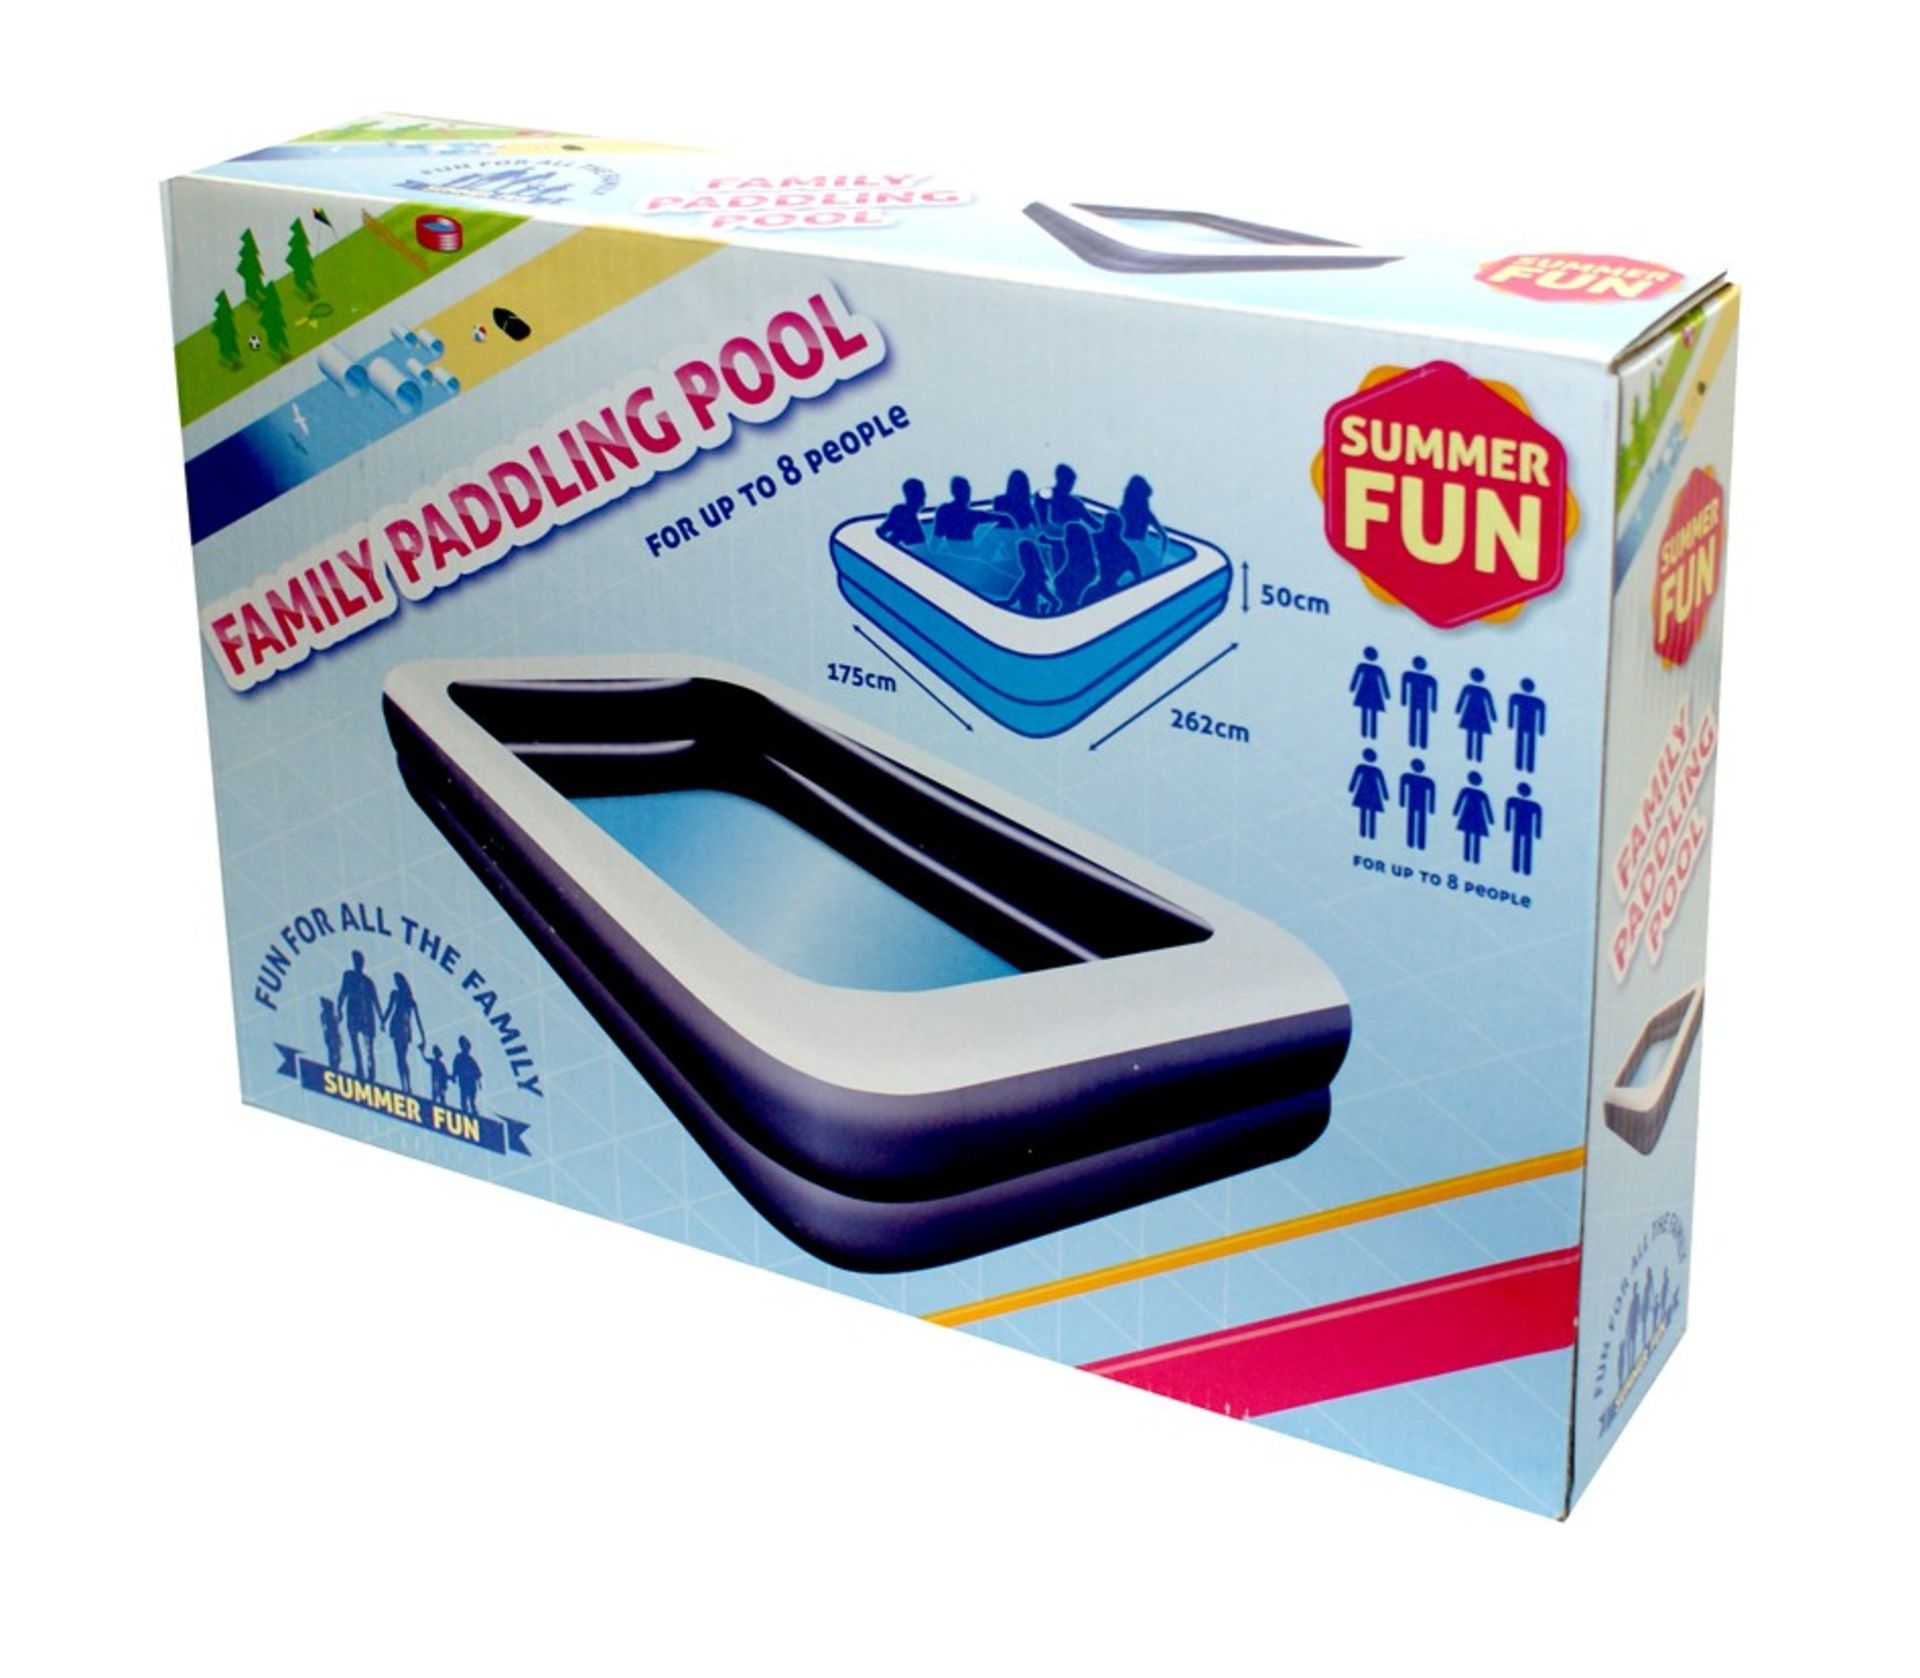 V Grade A 8 Person Family Pool 262cm x 175cm RRP £59.99 - Image 2 of 2